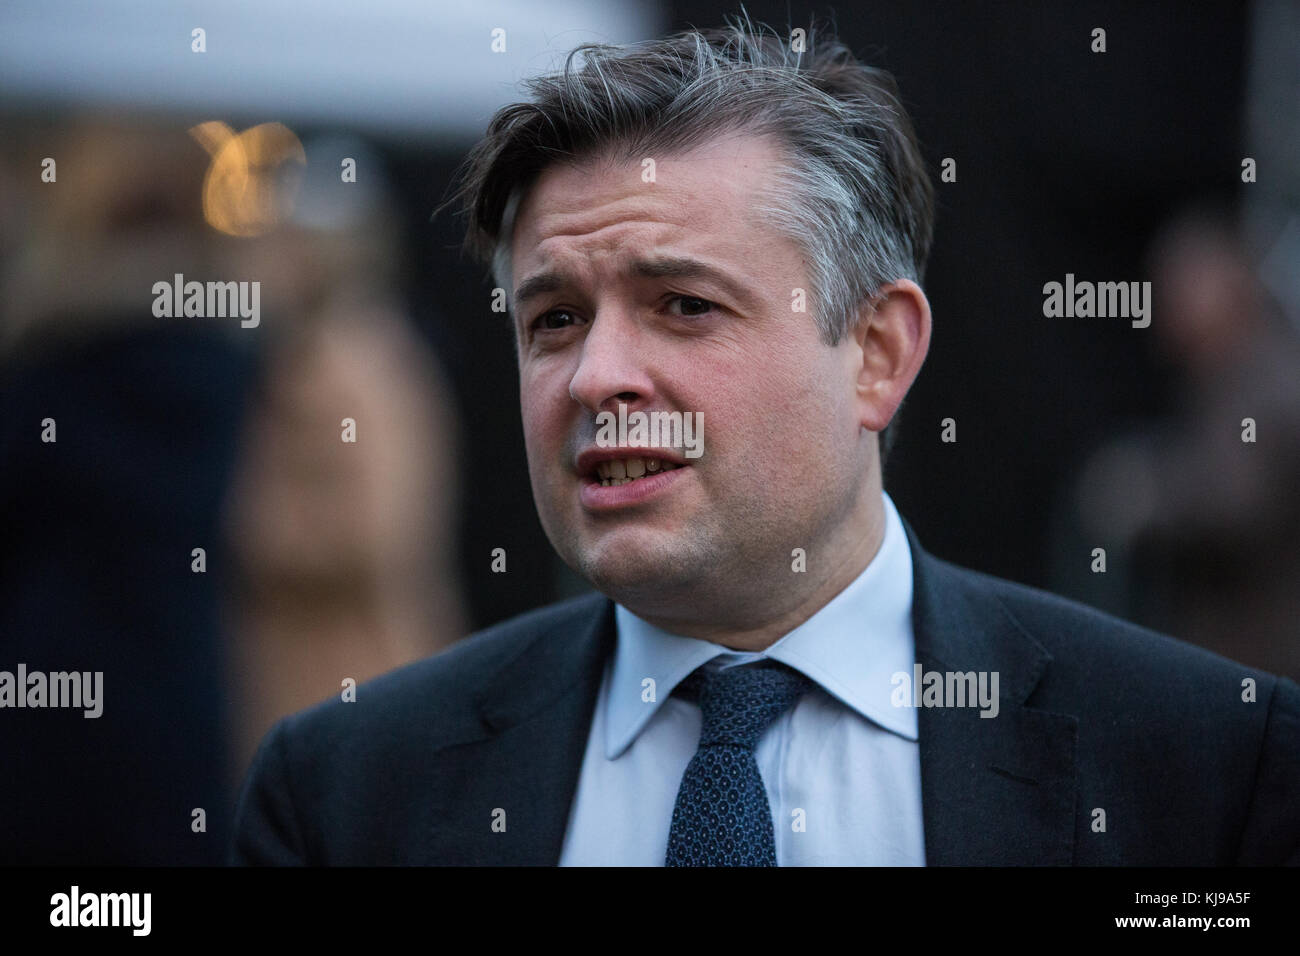 London, UK. 22nd November, 2017. Jon Ashworth MP, Shadow Secretary of State for Health, gives his opinion on Chancellor of the Exchequer Philip Hammond's Budget announcement during an interview with broadcast media on College Green. Credit: Mark Kerrison/Alamy Live News Stock Photo